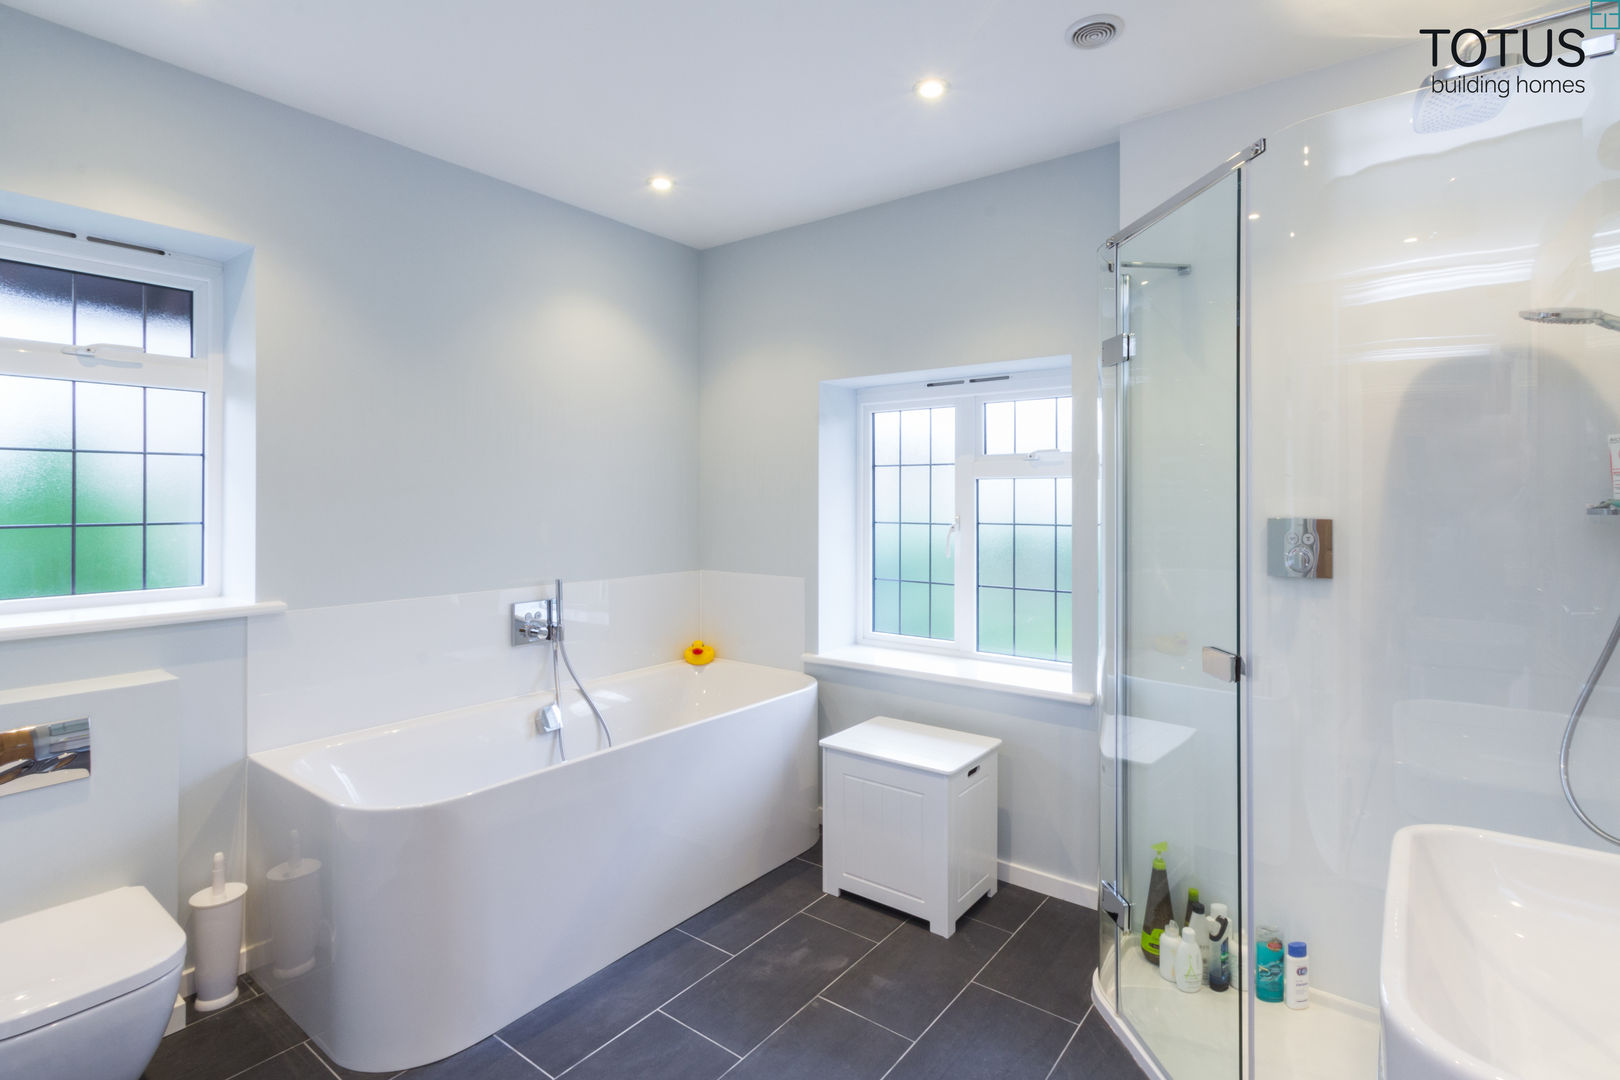 ​A Classic Country Home For The Modern Age, TOTUS TOTUS Modern bathroom